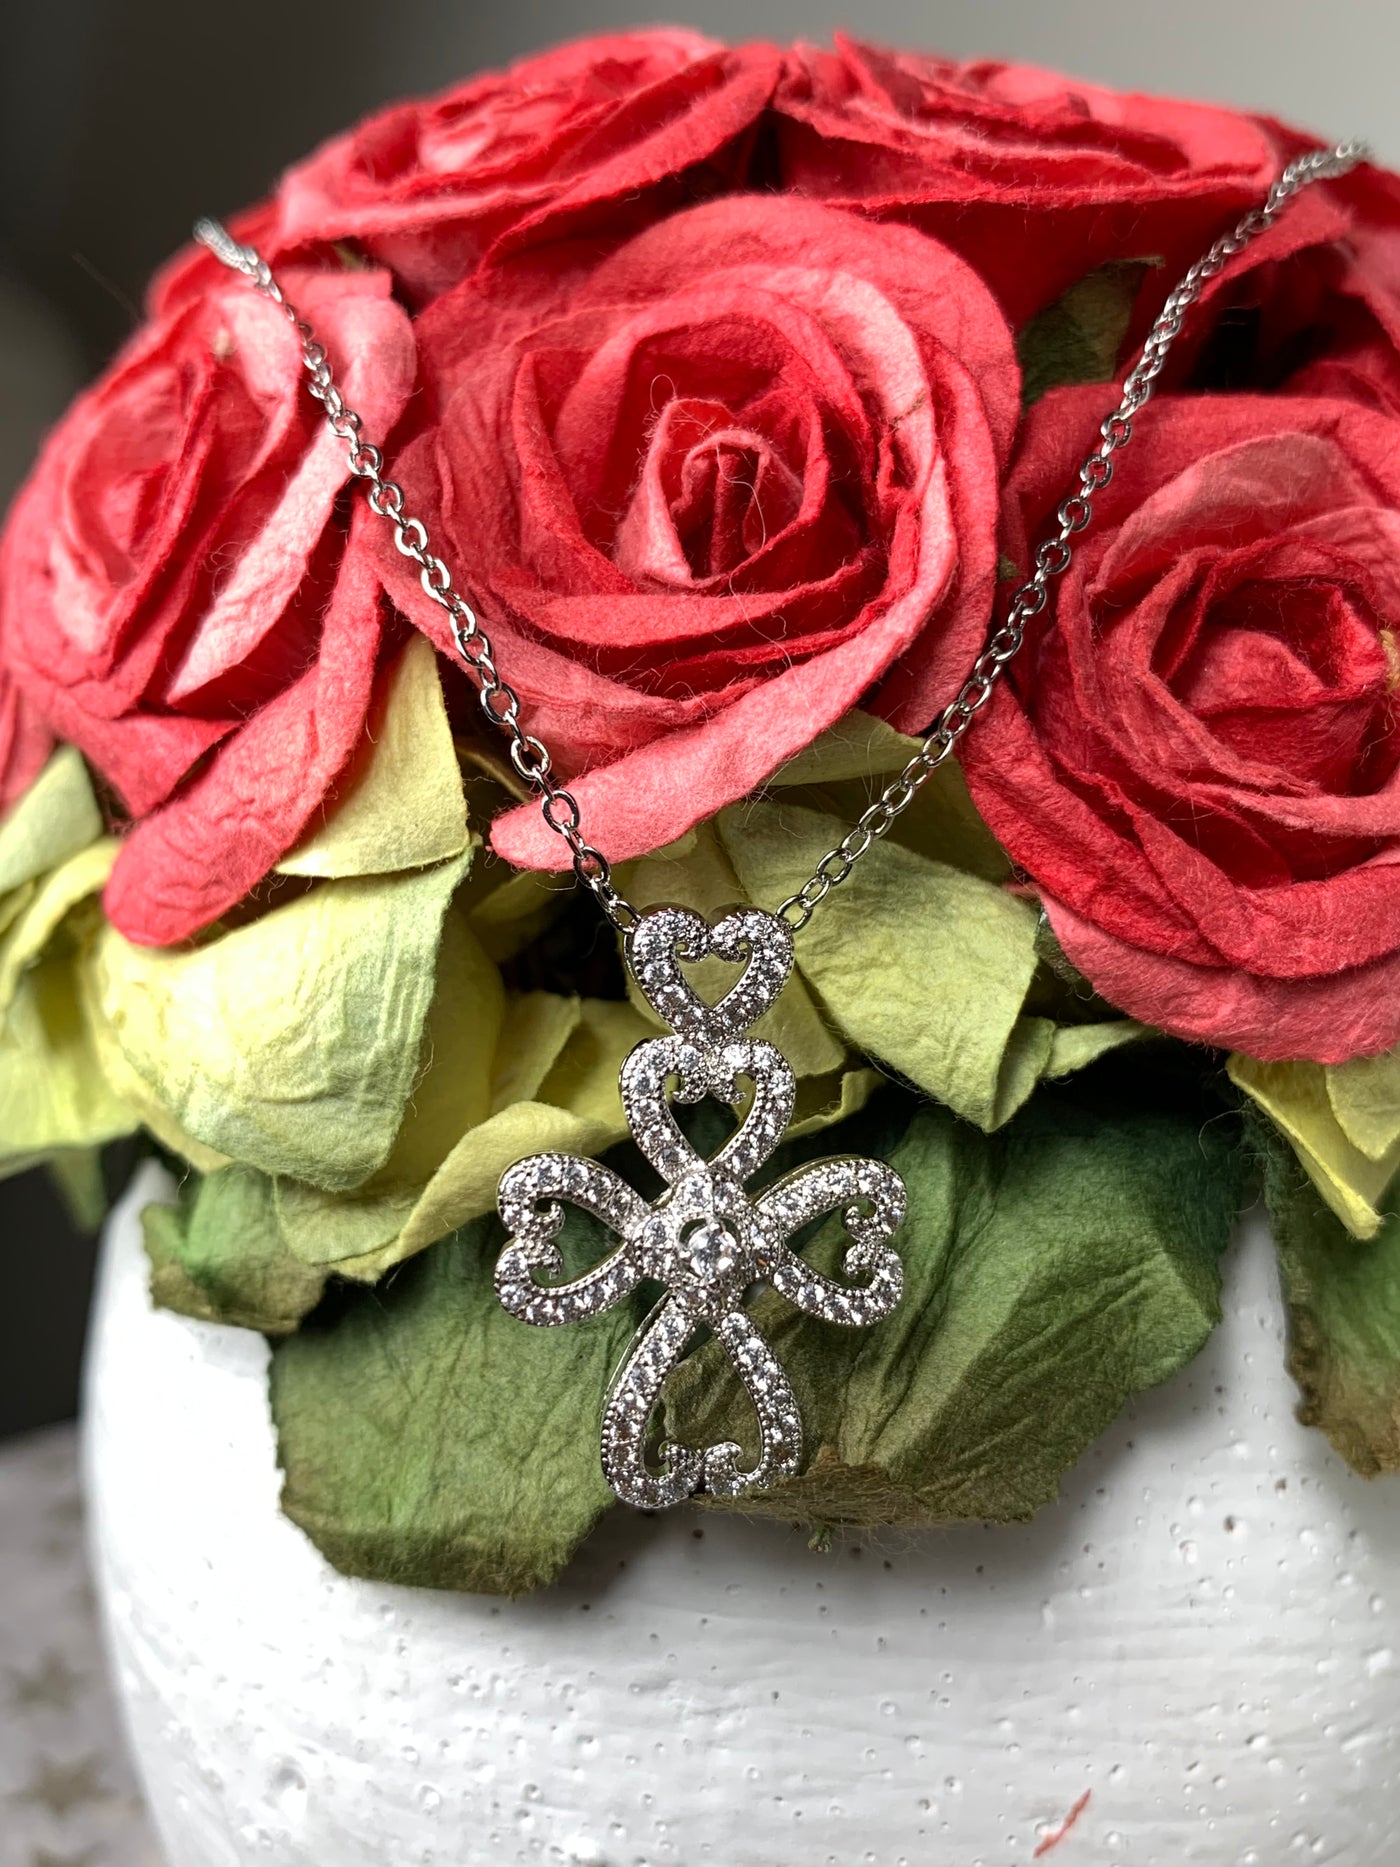 Hearts in a Cross CZ Pendant in Silver, Yellow Gold and Rose Gold Tone